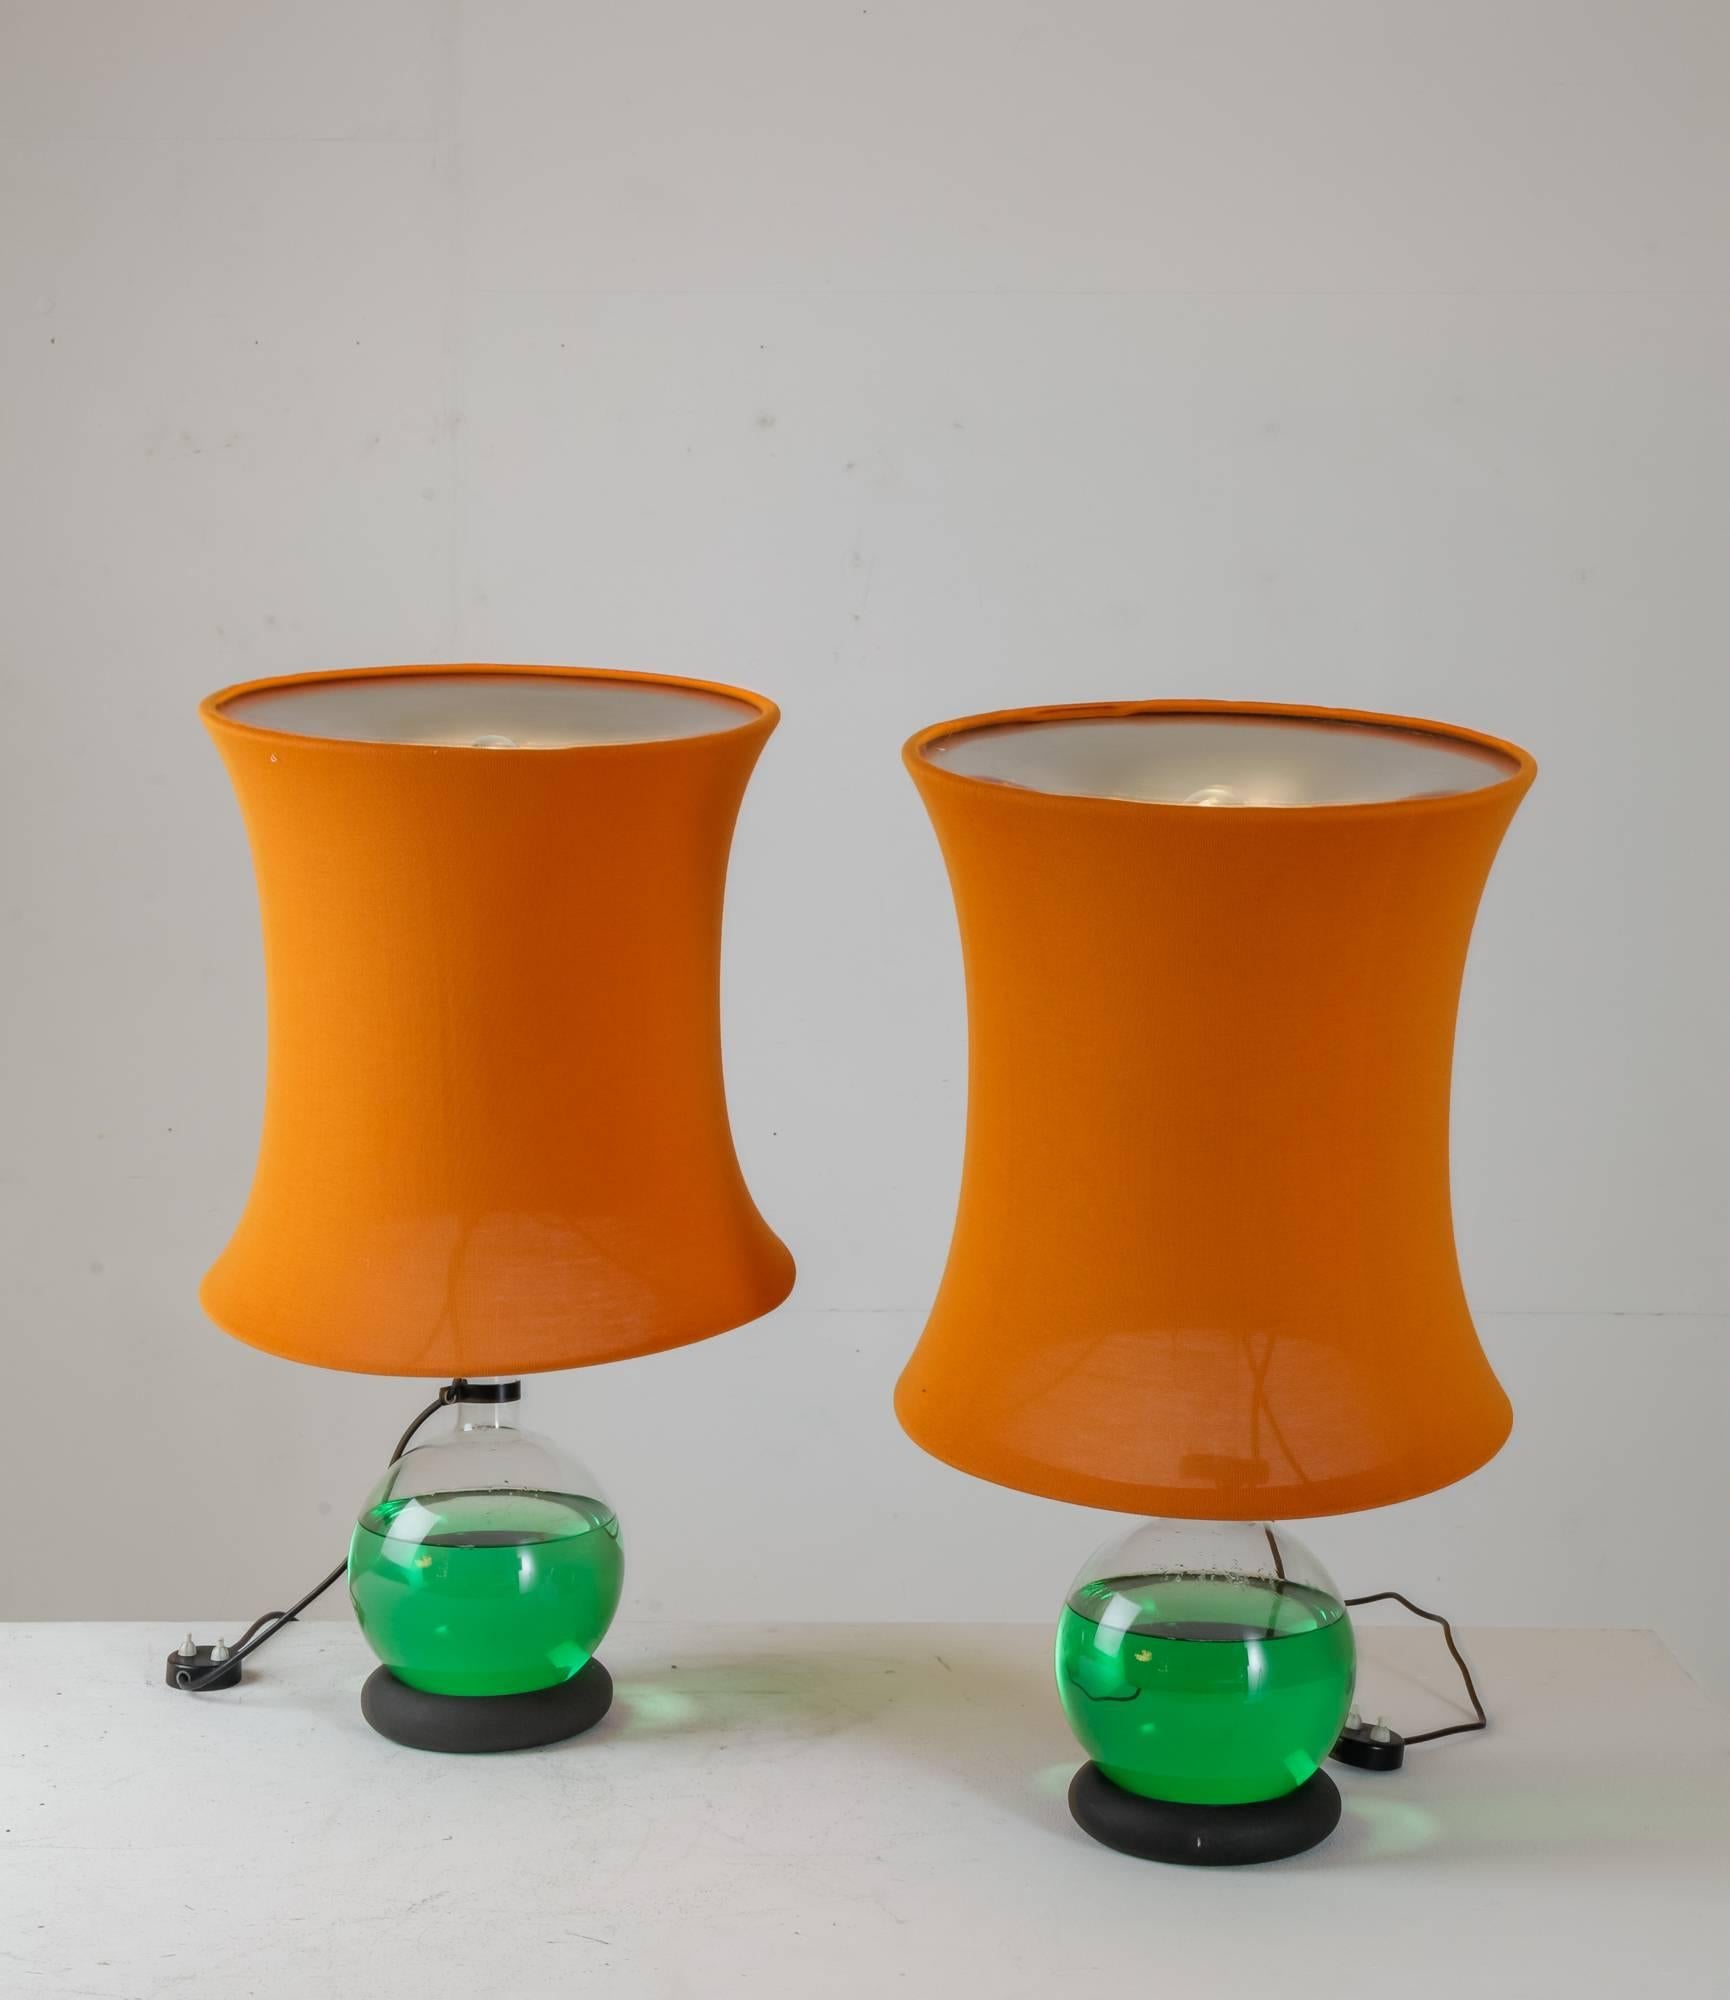 A set of two Lotus table lamps designed by Gianfranco Frattini for Meroni in 1966. The lamps are made of a lacquered wooden ring base on which a glass flask filled with transparent green liquid stands, creating a lens-like optical effect. The colour